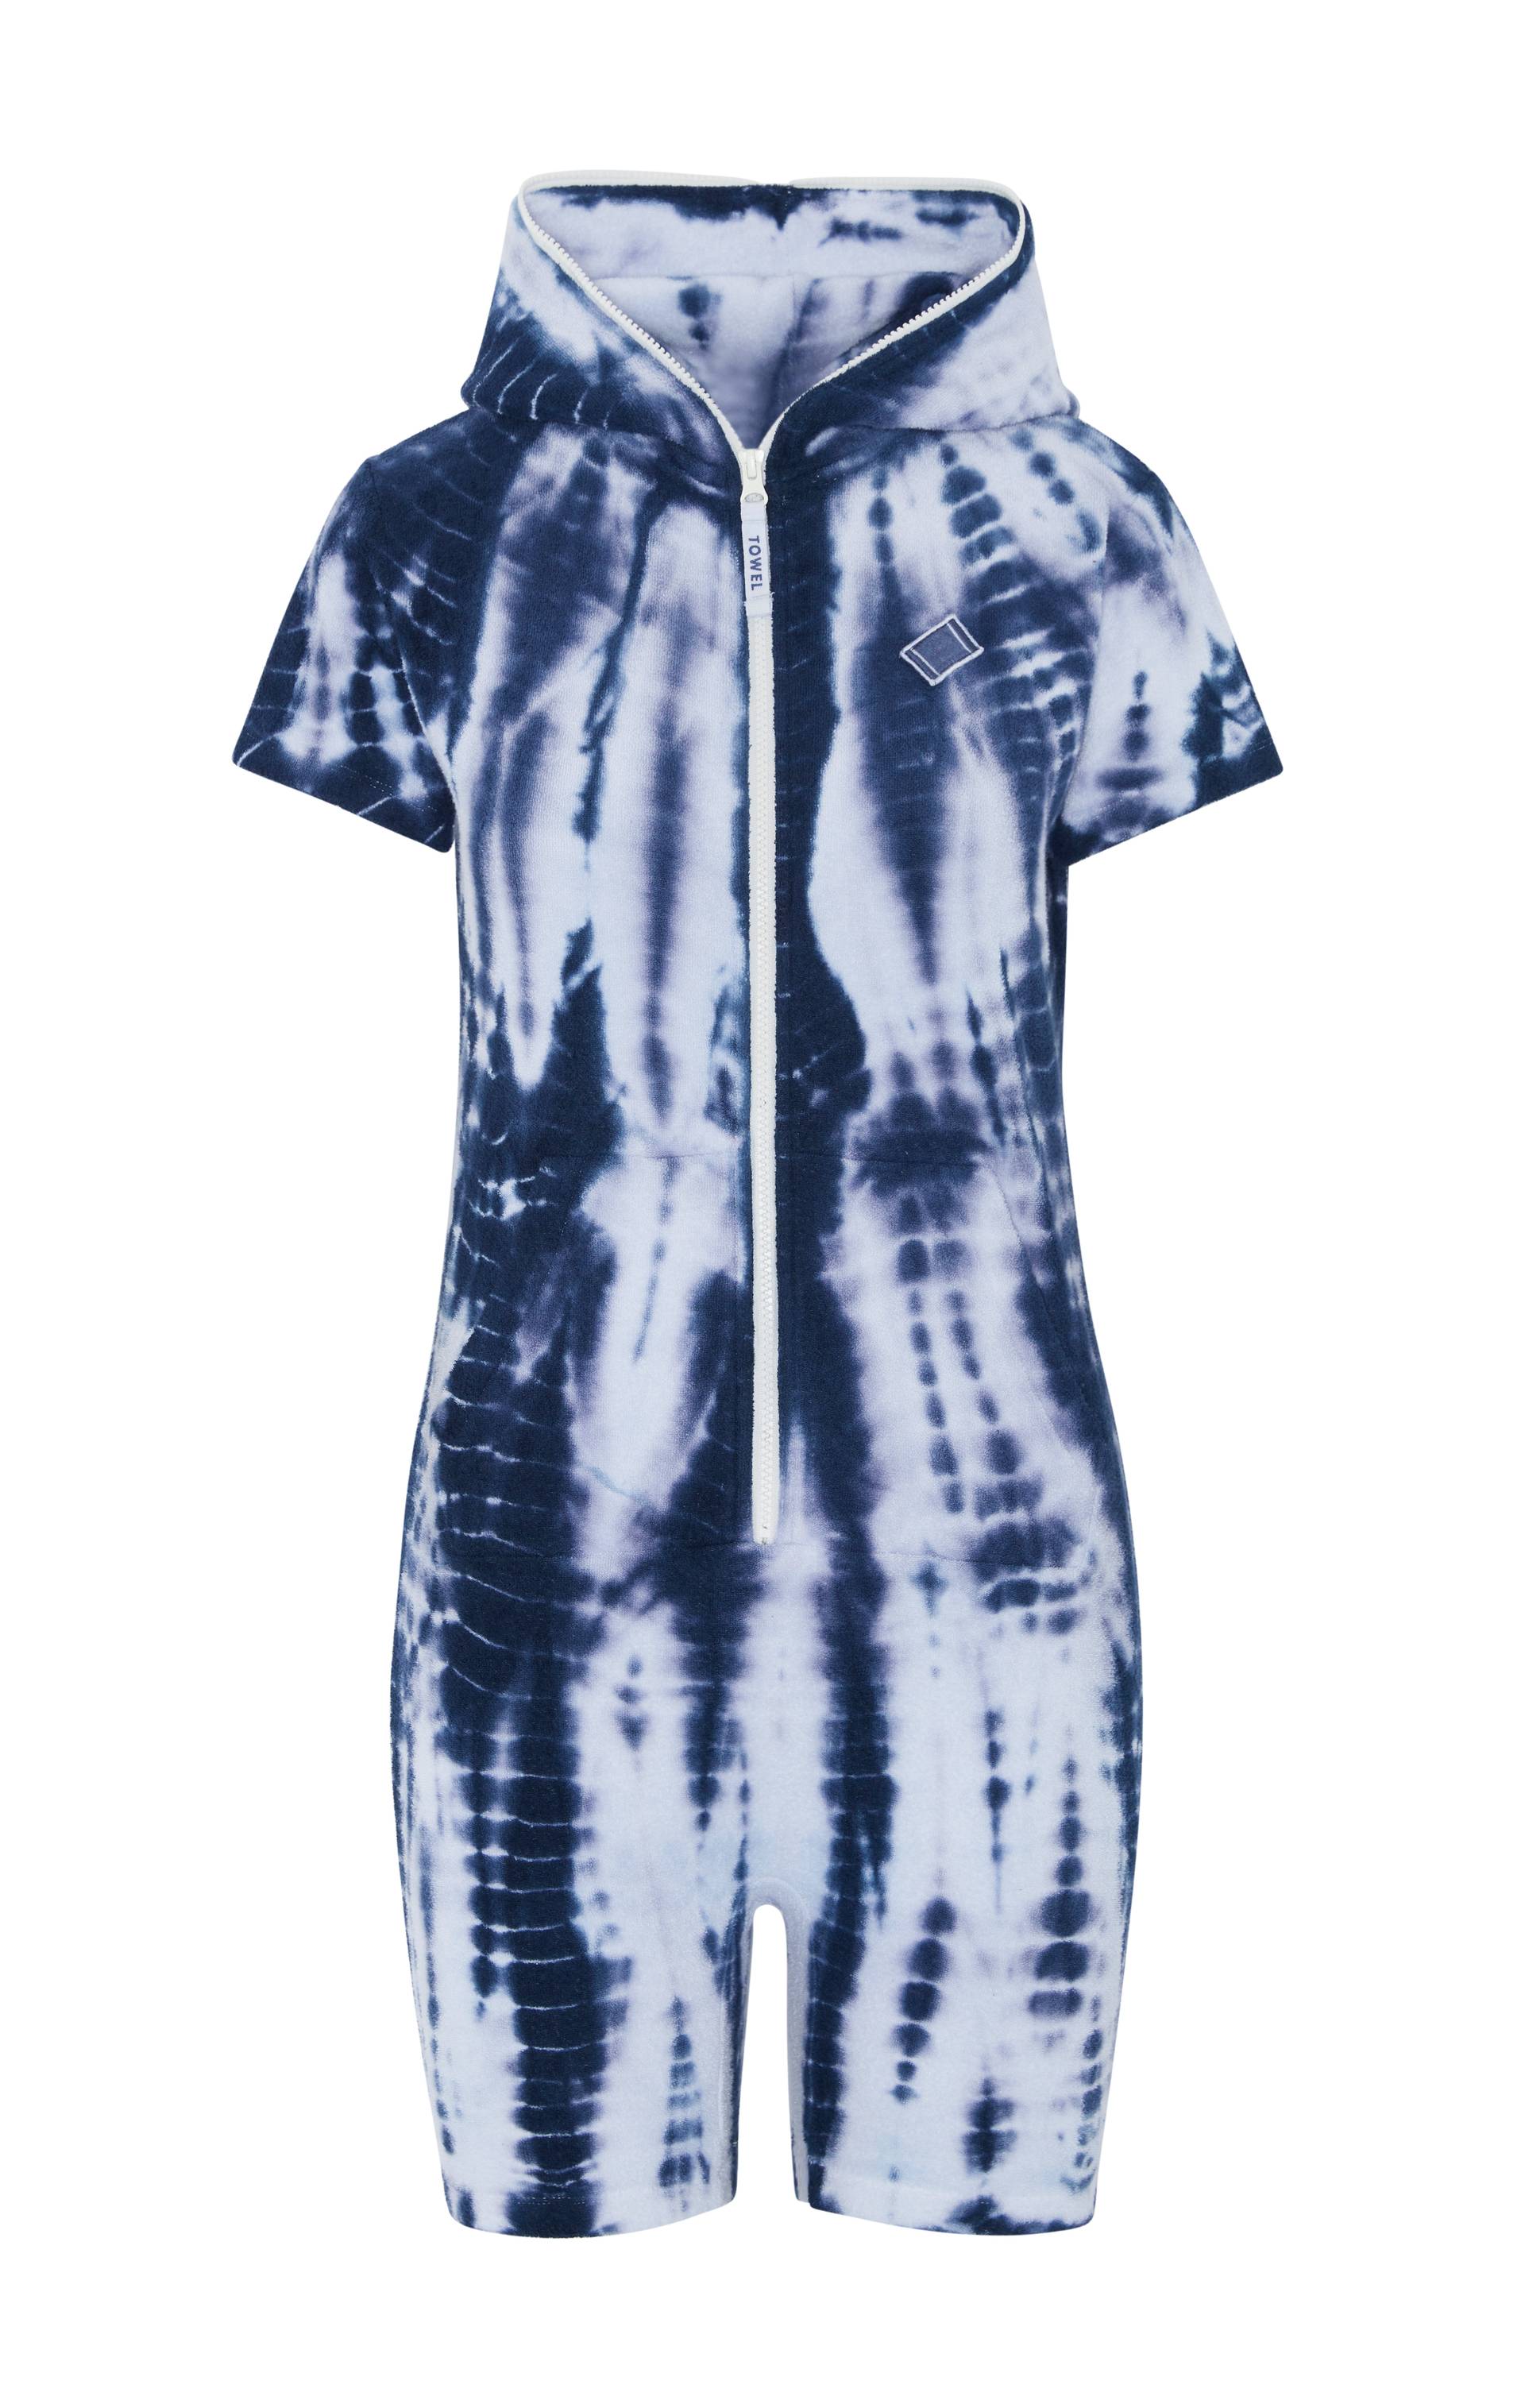 Onepiece Towel Club Fitted Short Jumpsuit Blue Tie Dye - 1